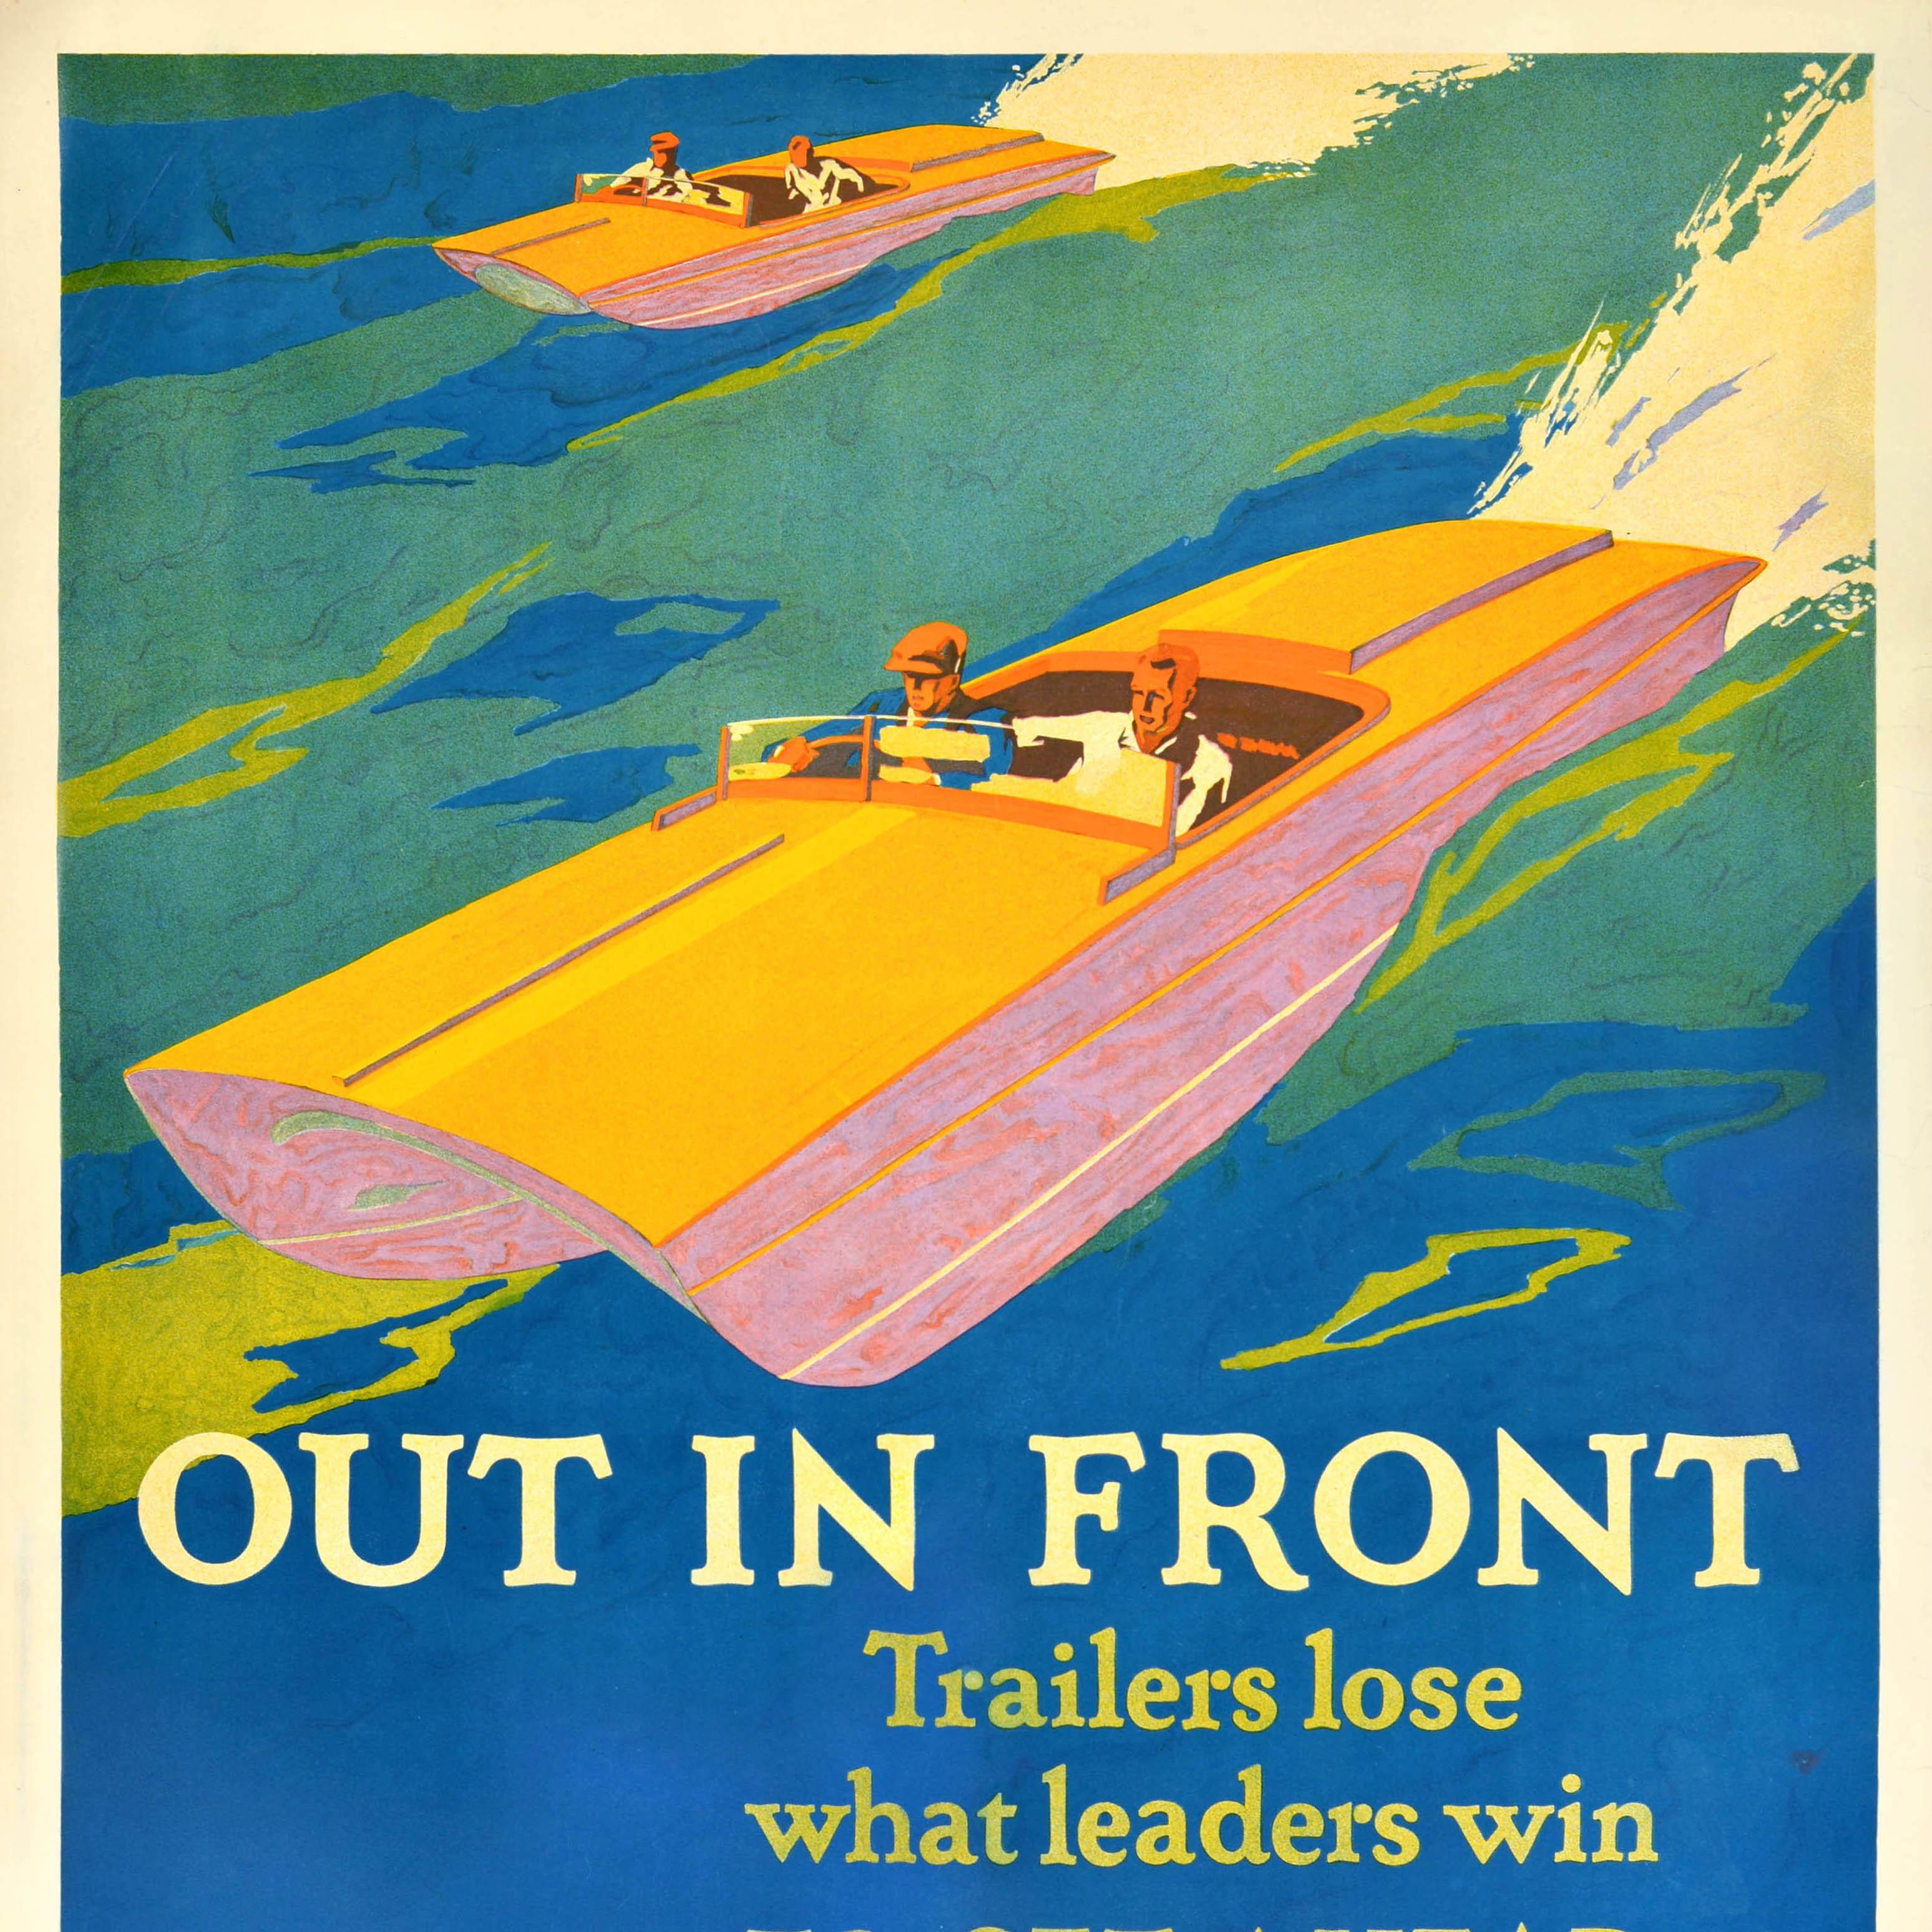 Original vintage workplace motivational poster - Out In Front Trailers lose what leaders win To get ahead be ahead - dynamic design featuring men racing speed boats across blue and green waters with the text below. Mather & Company printers issued